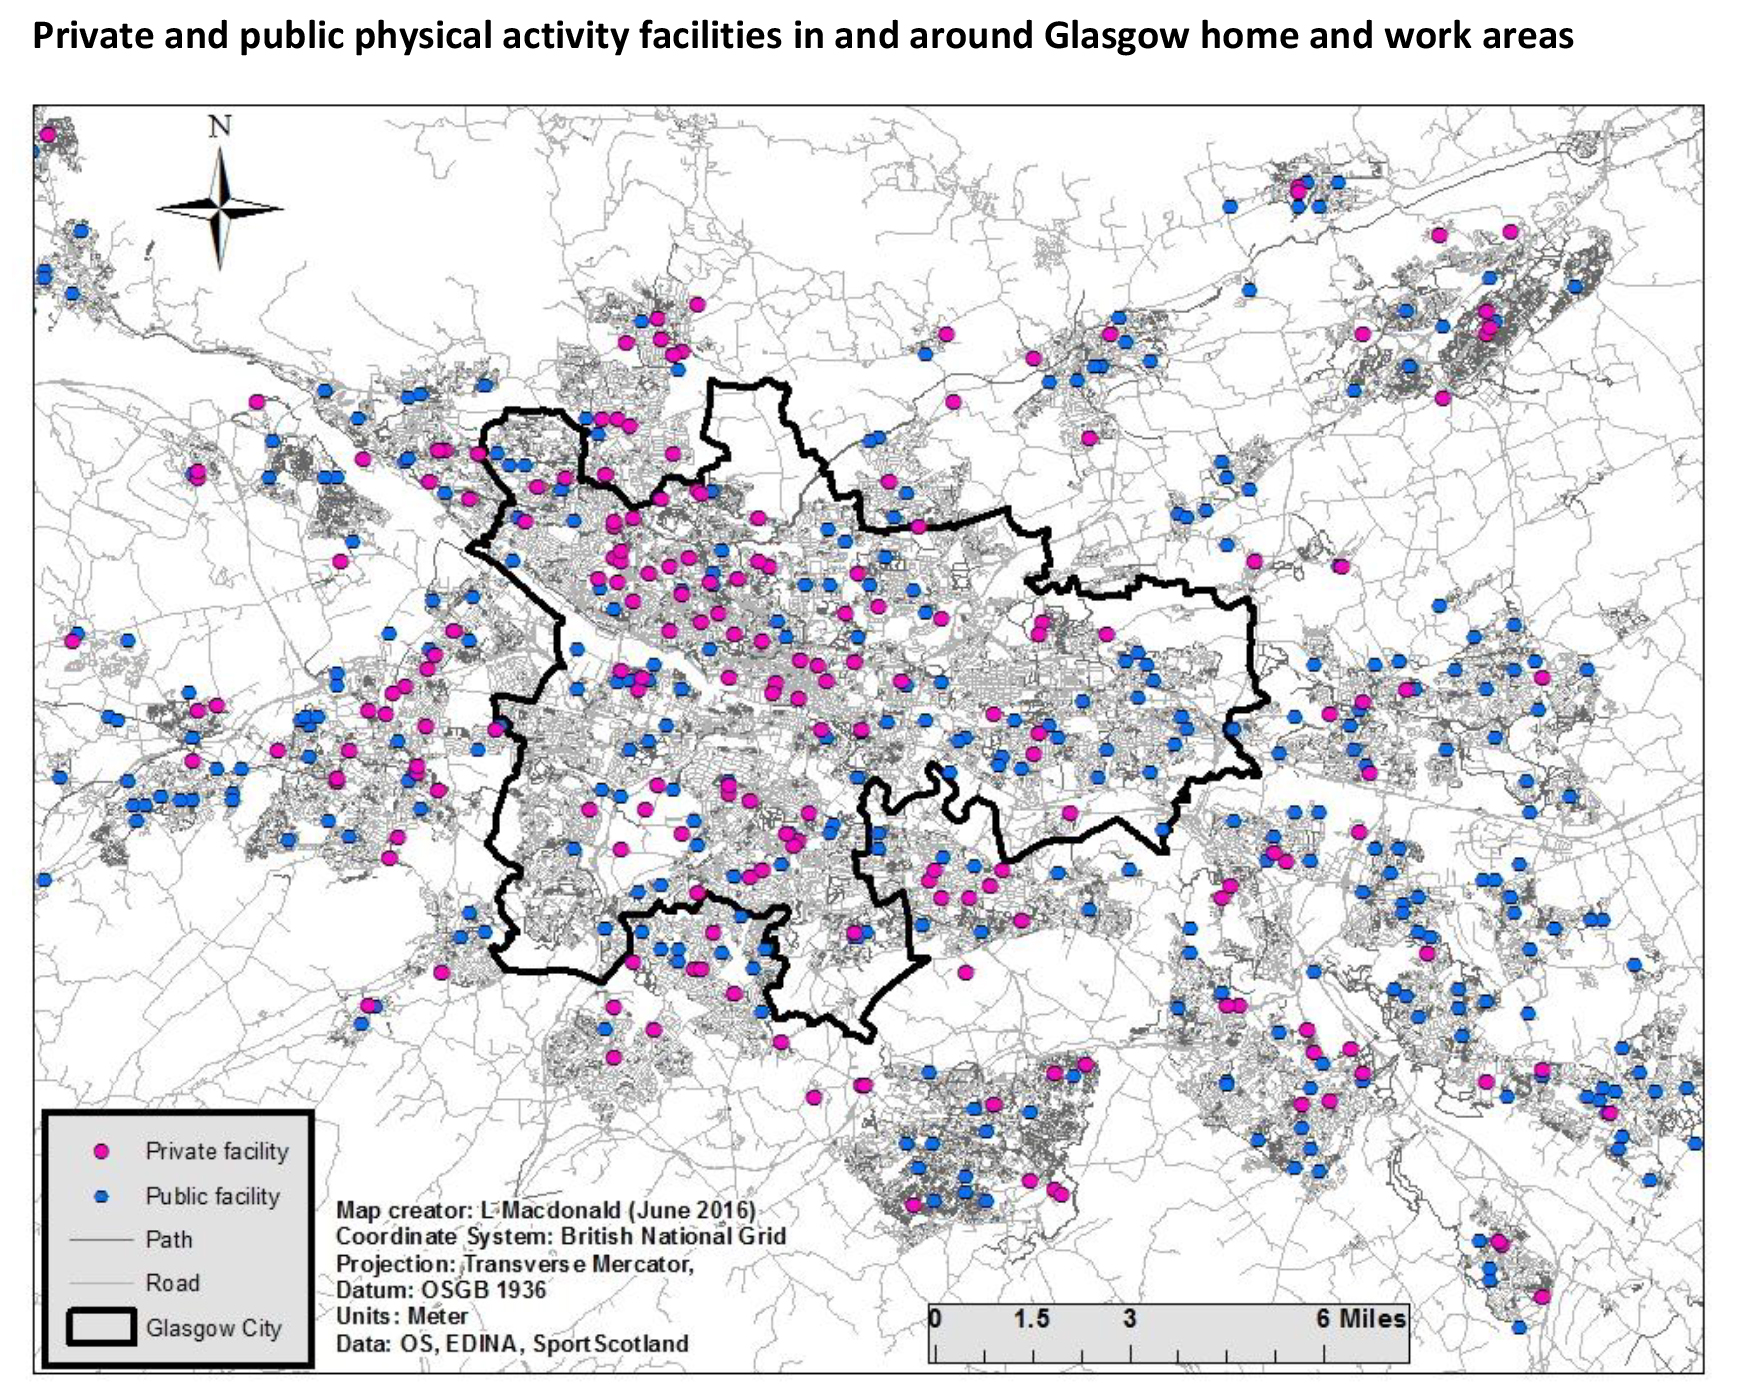 Private and public physical activity facilities in and around Glasgow home and work areas.jpg